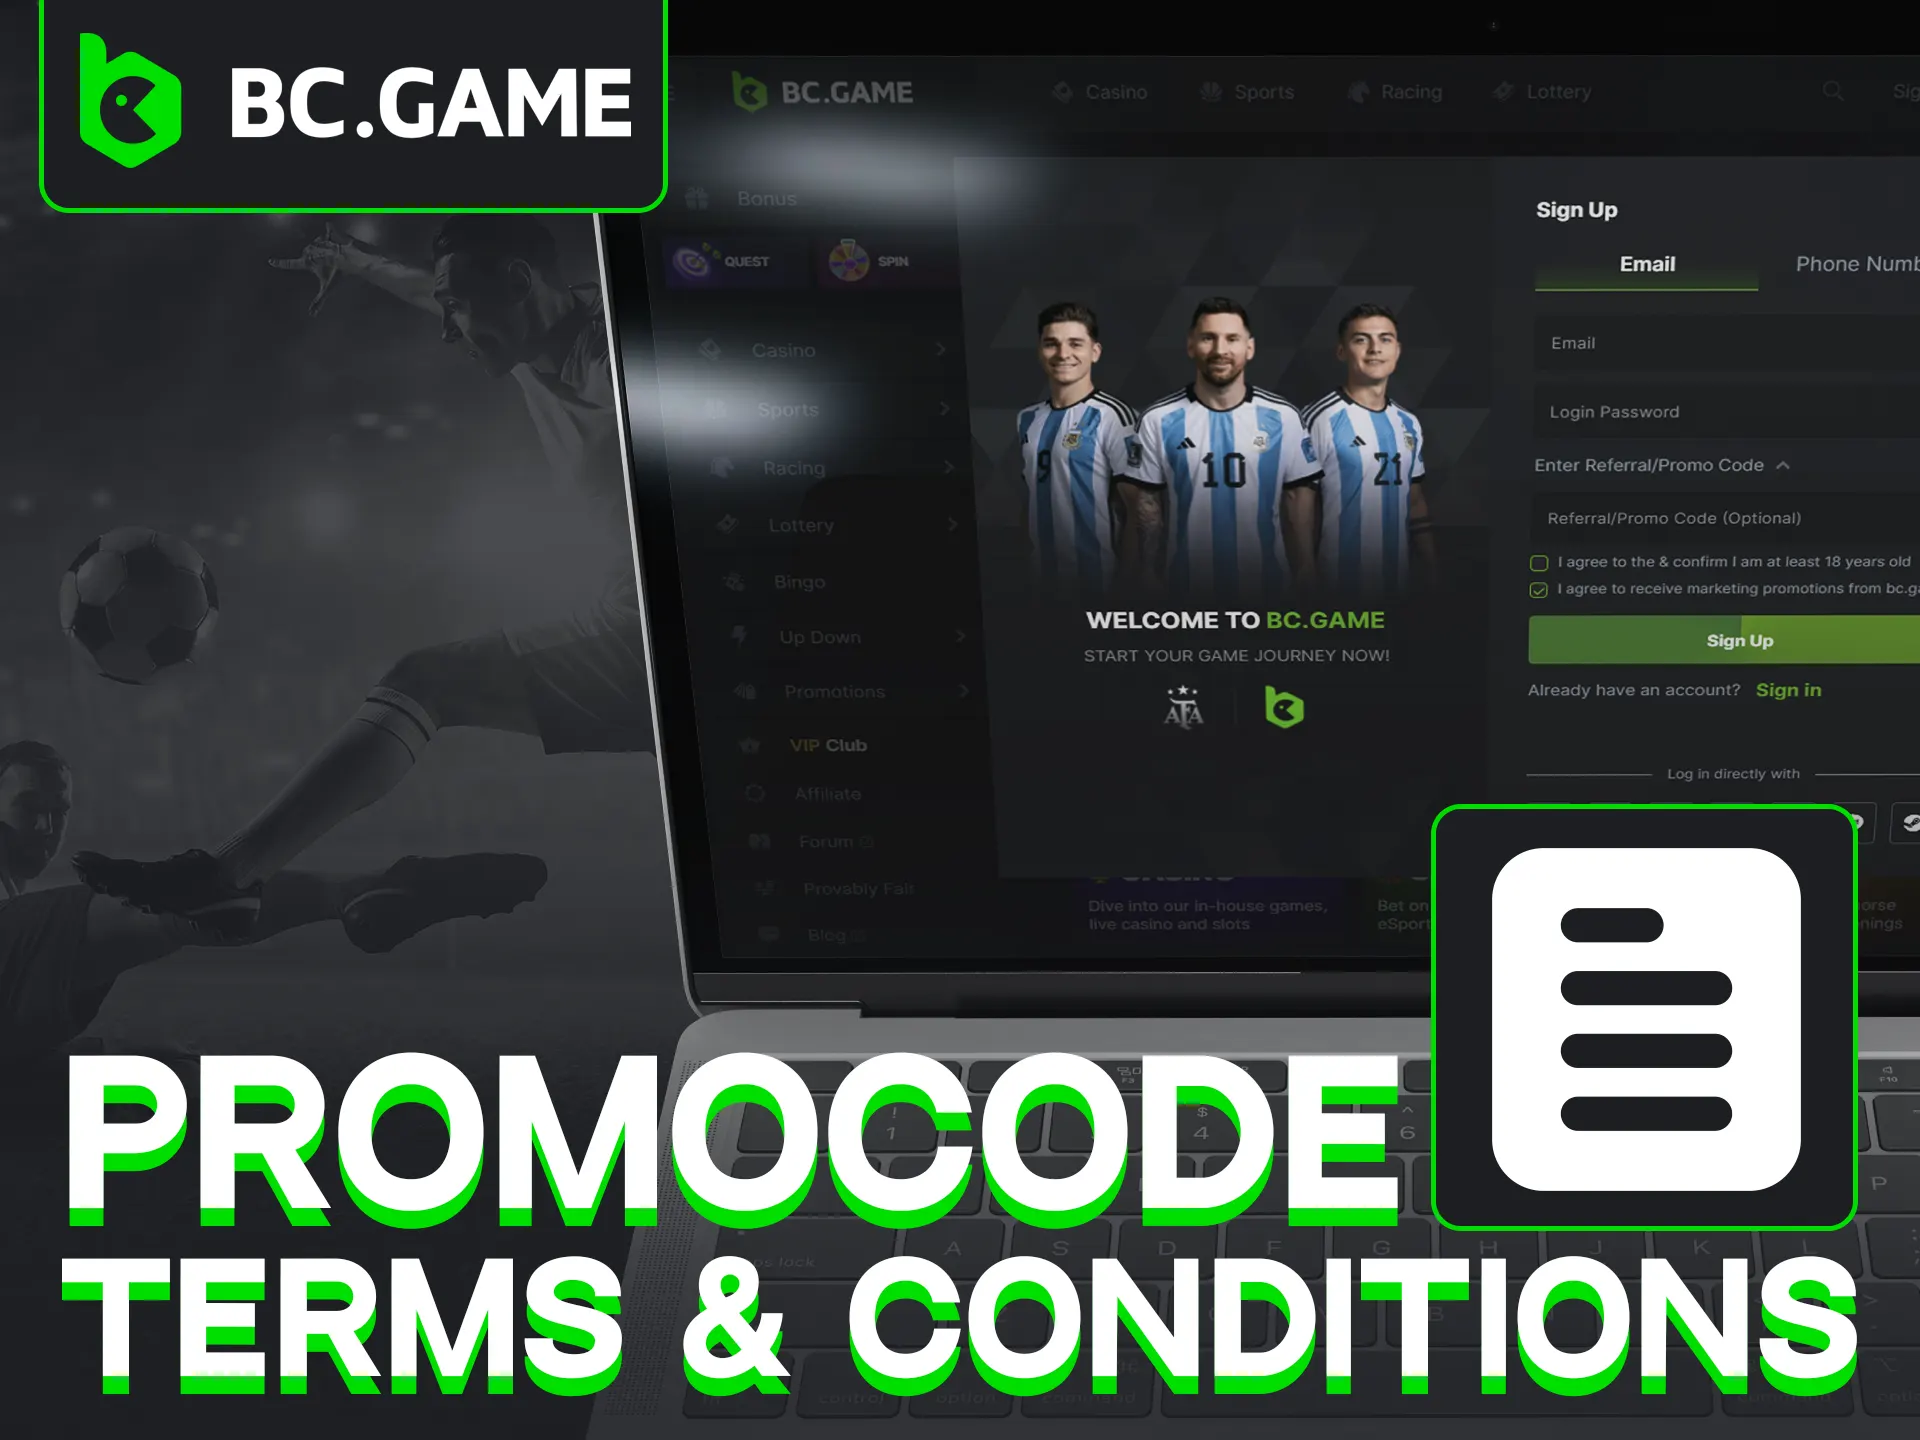 BC Game promo code rules include one use, expiry, and regional limitations.